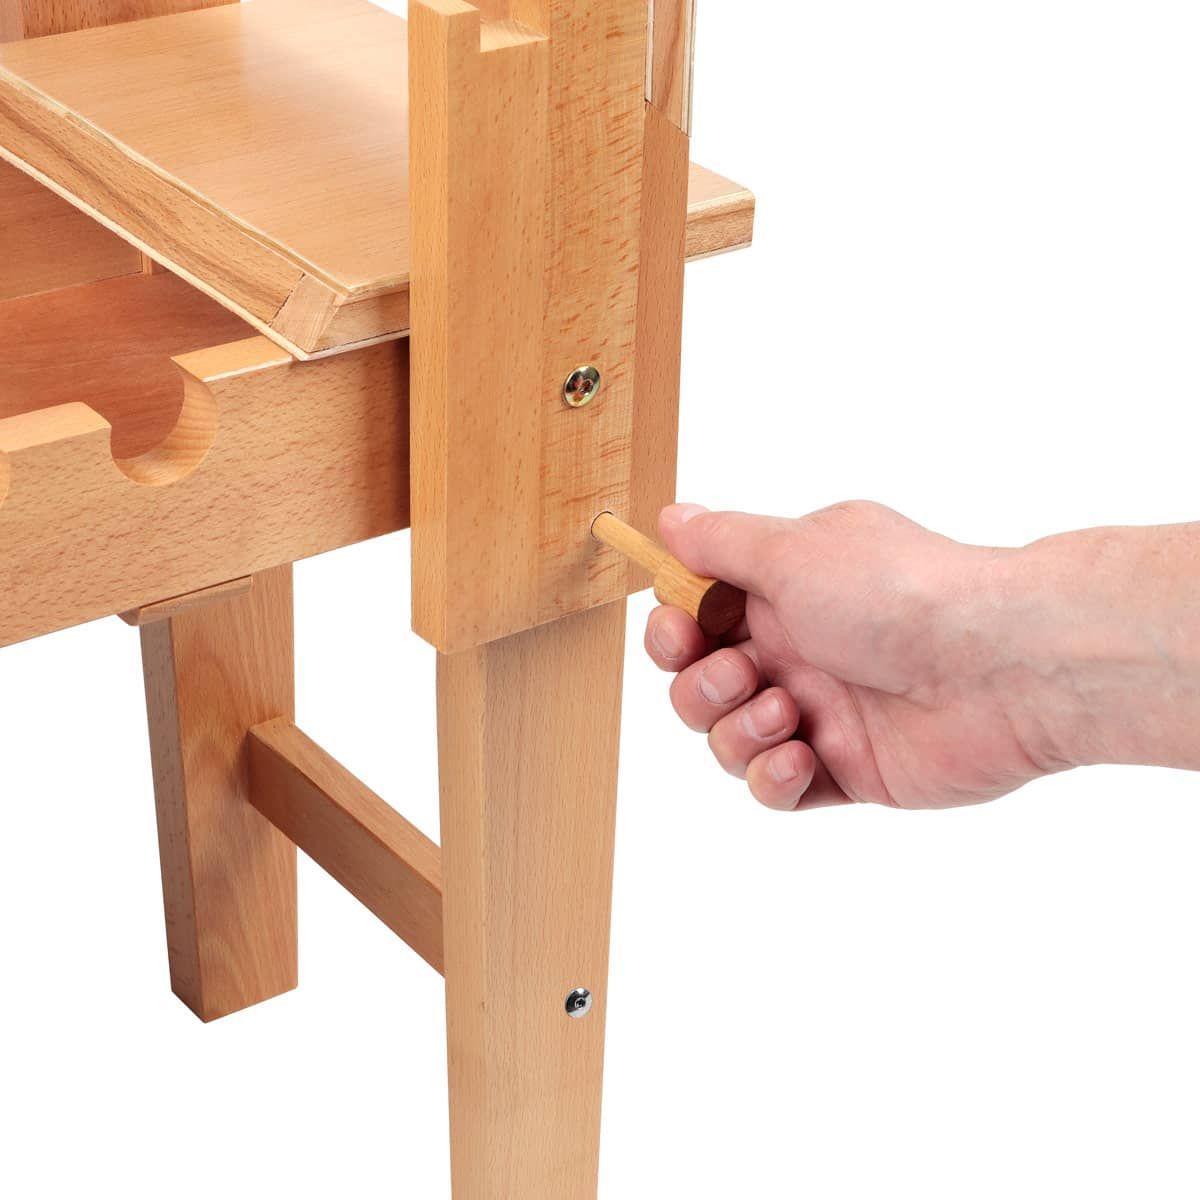 Locking pin secures the support at a 90-degree angle